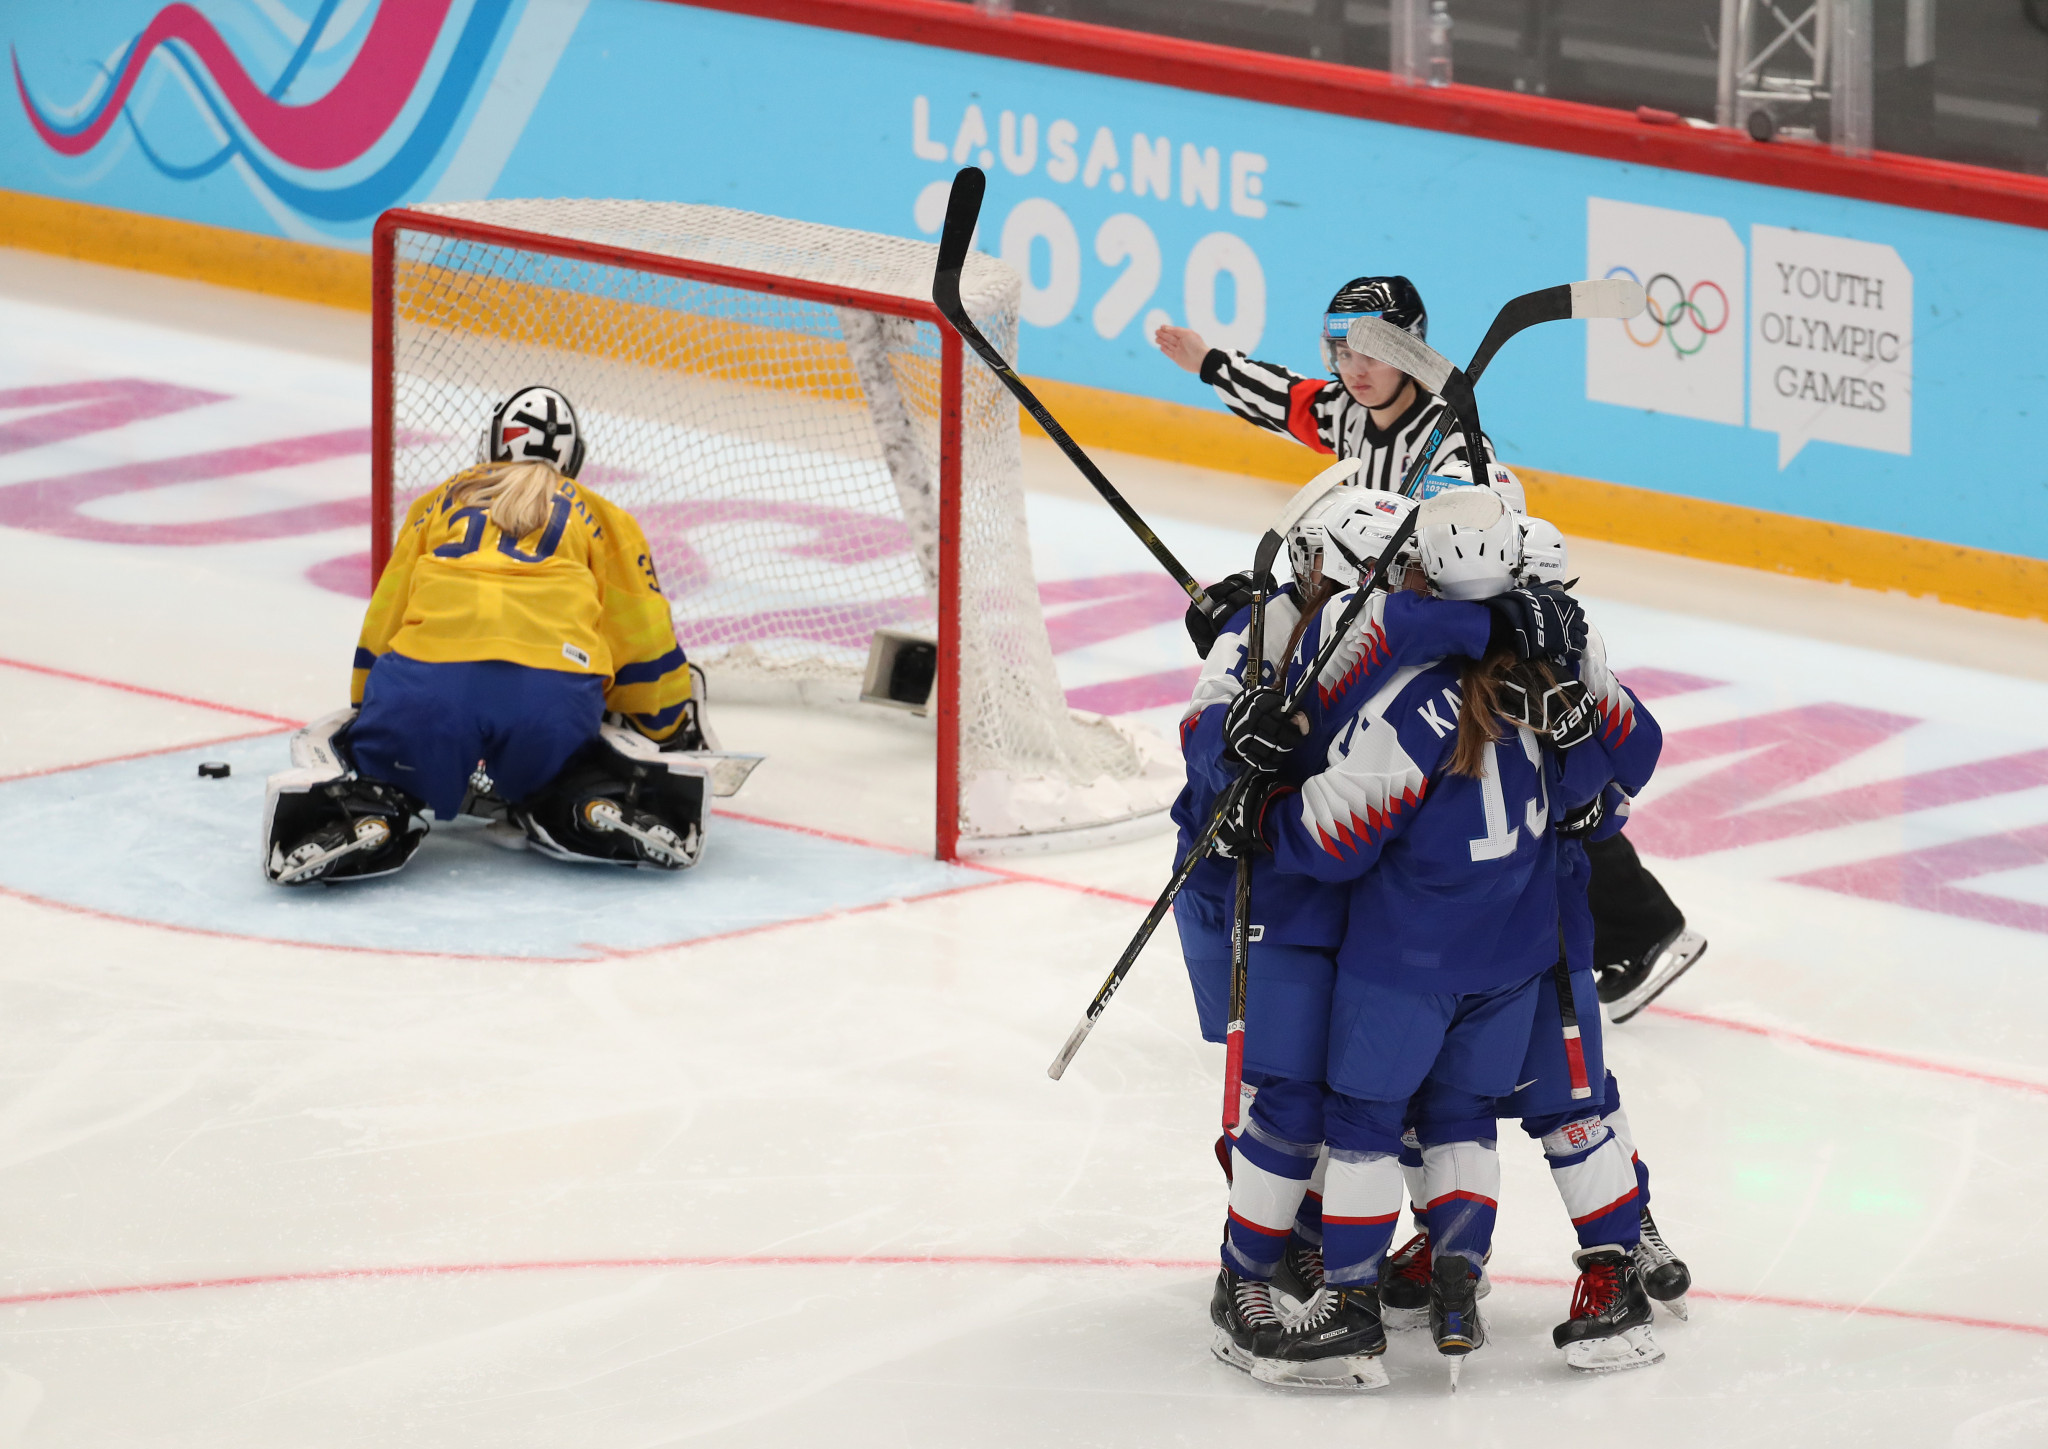 The preliminary stages of ice hockey competition began ©Getty Images